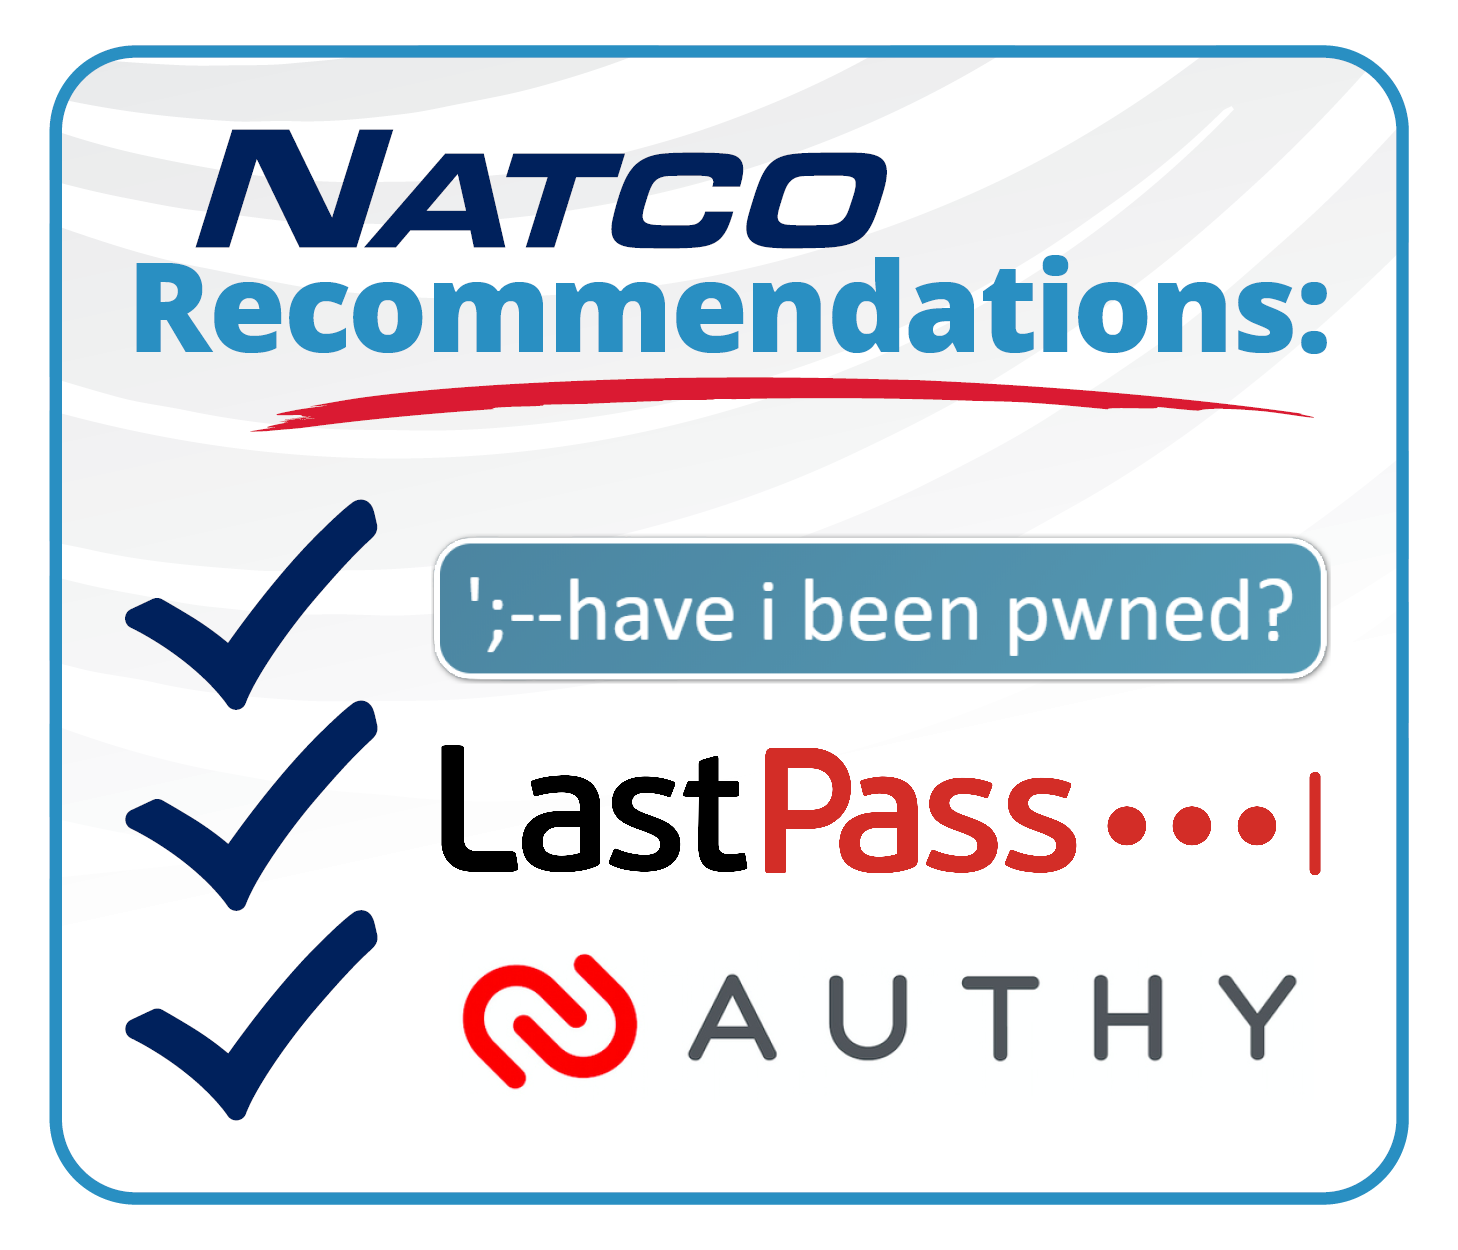 NATCO Recommendations: have i been pwned, LastPass, and Authy